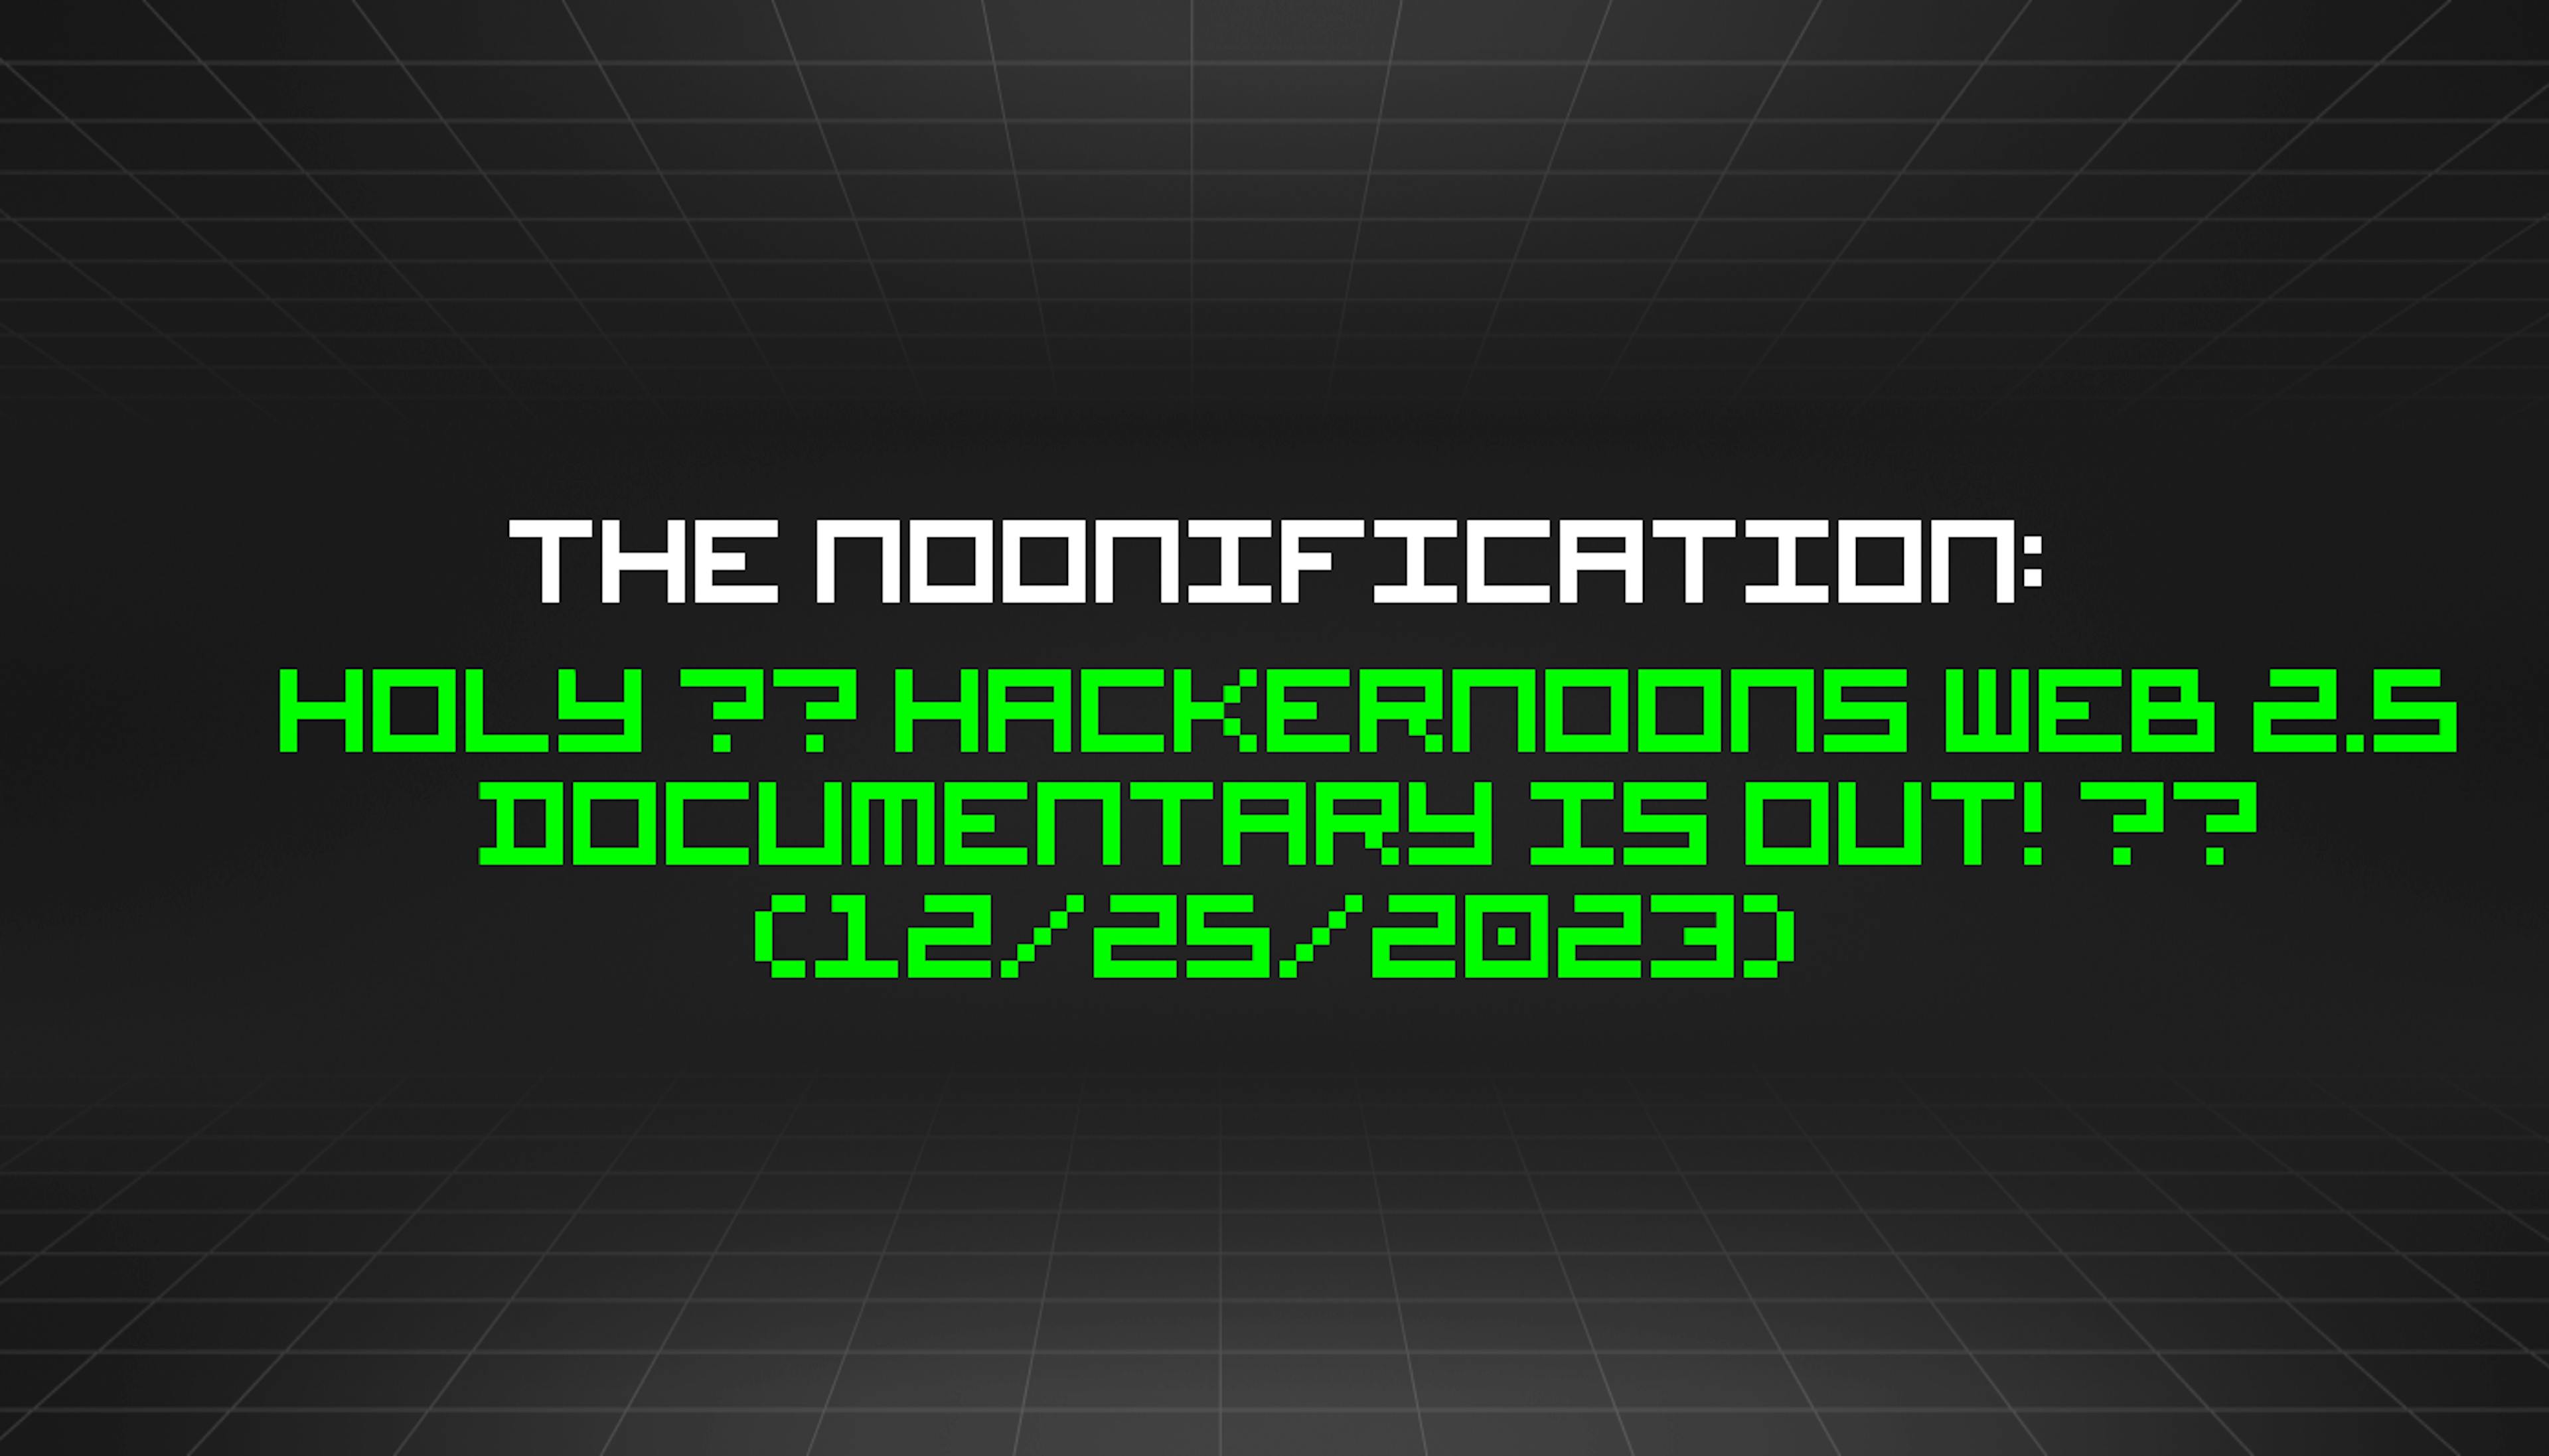 featured image - The Noonification: Holy 🎅 HackerNoons Web 2.5 Documentary is Out! 😮 (12/25/2023)